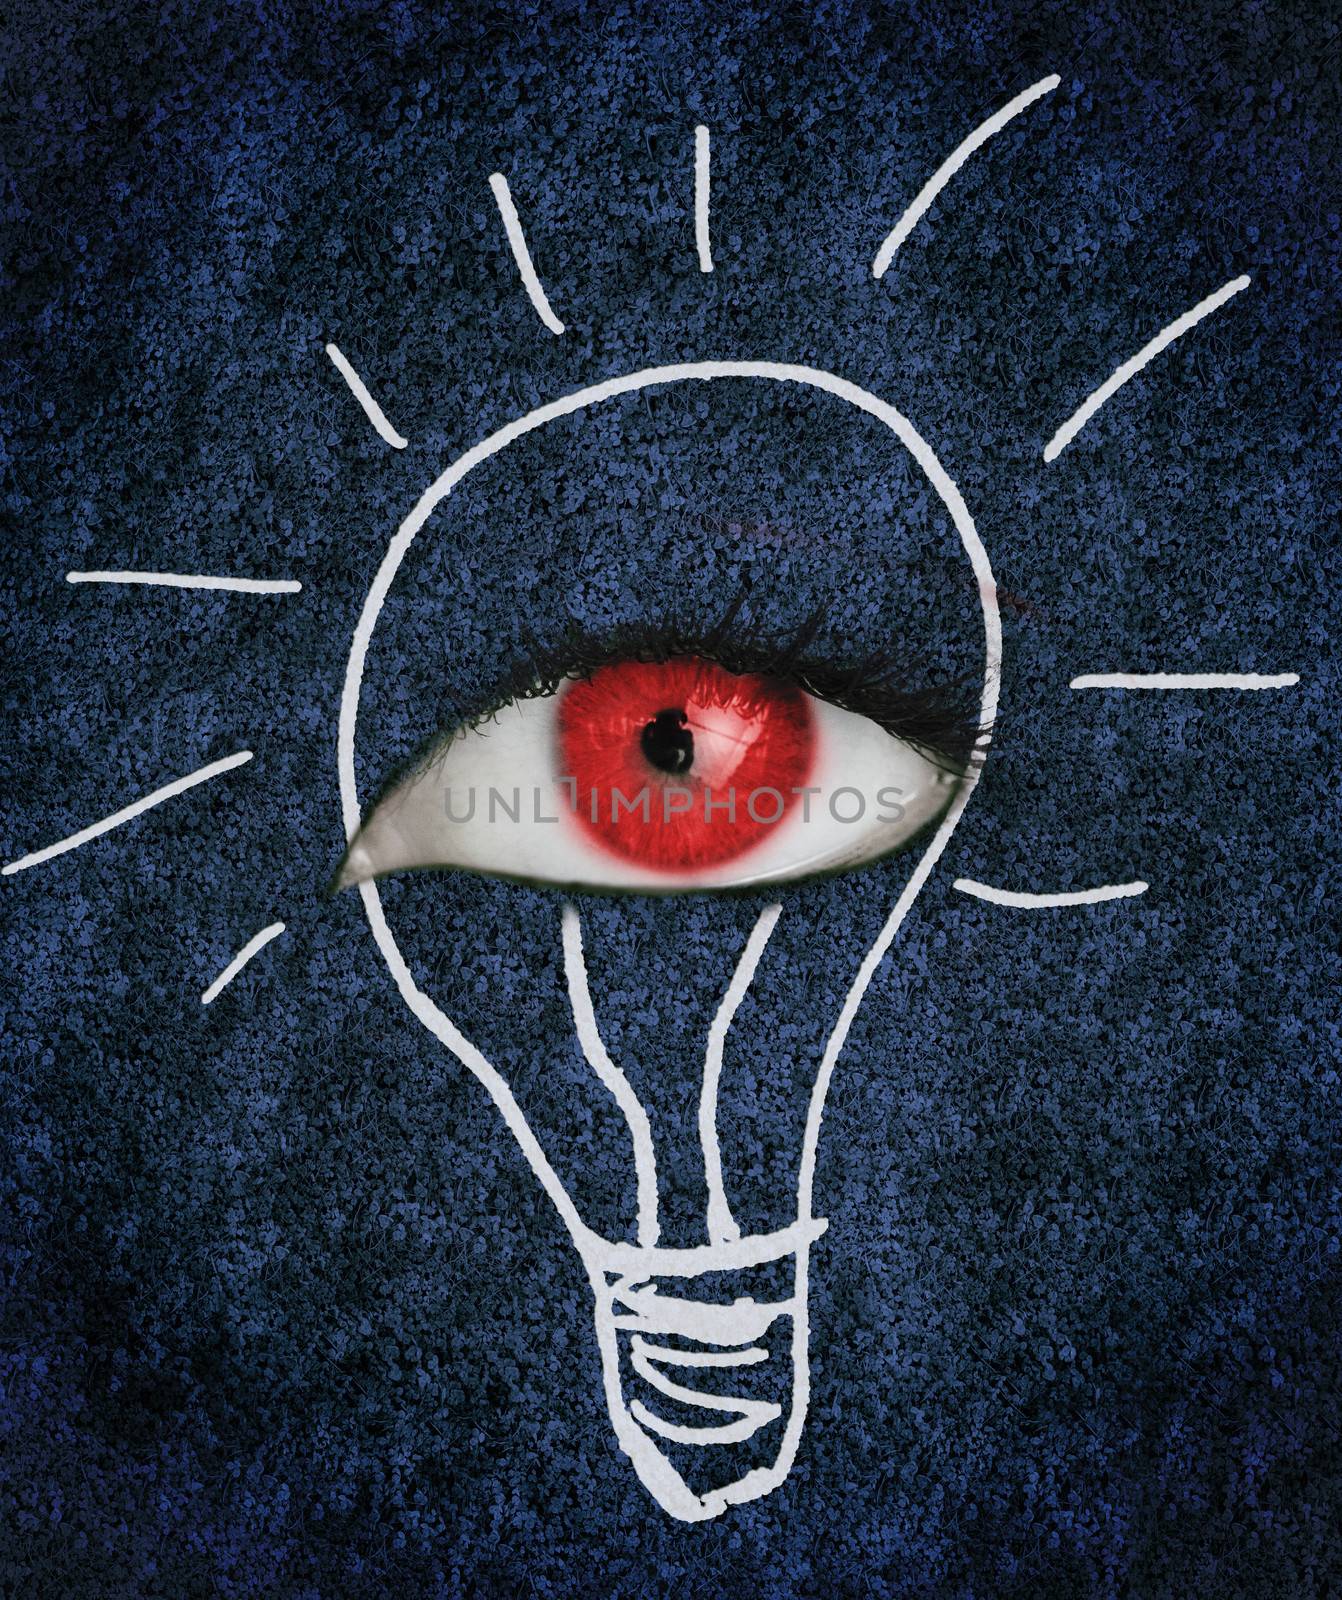 Red eye over blue texture surrounded by a drawing of a lightbulb by Wavebreakmedia